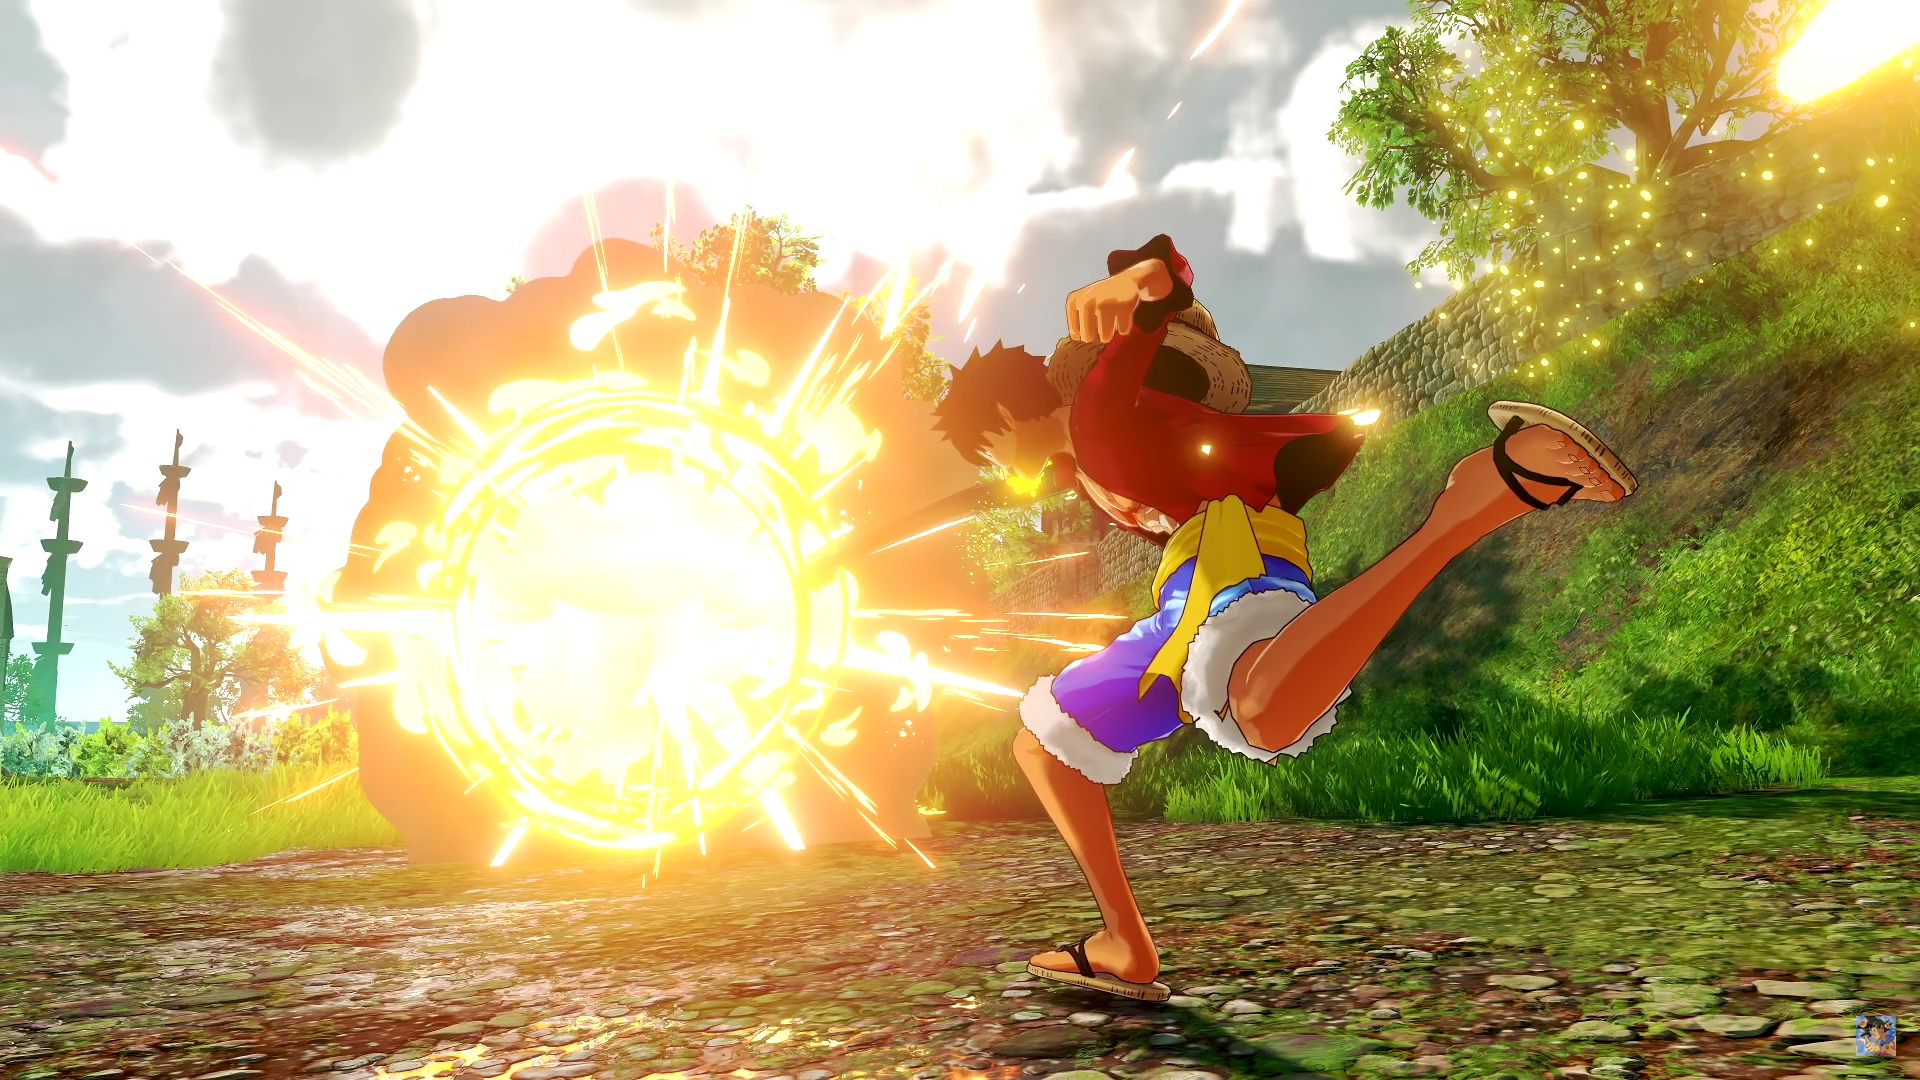 New One Piece Game, One Piece: World Seeker coming in 2018 - EKGAMING